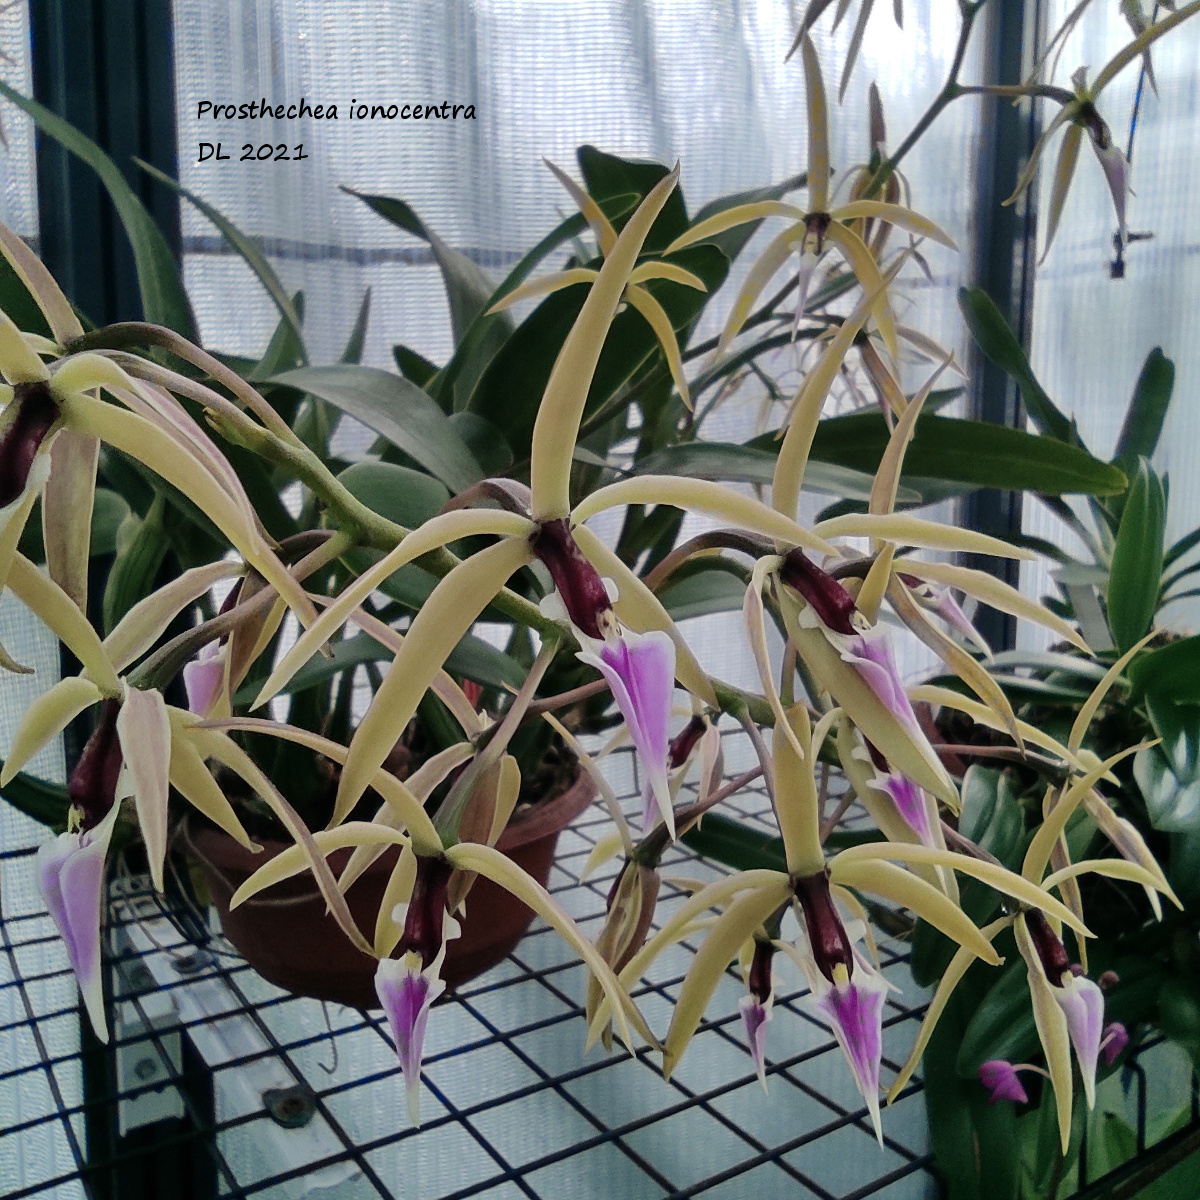 Prosthechea ionocentra IMG_20210830_175536